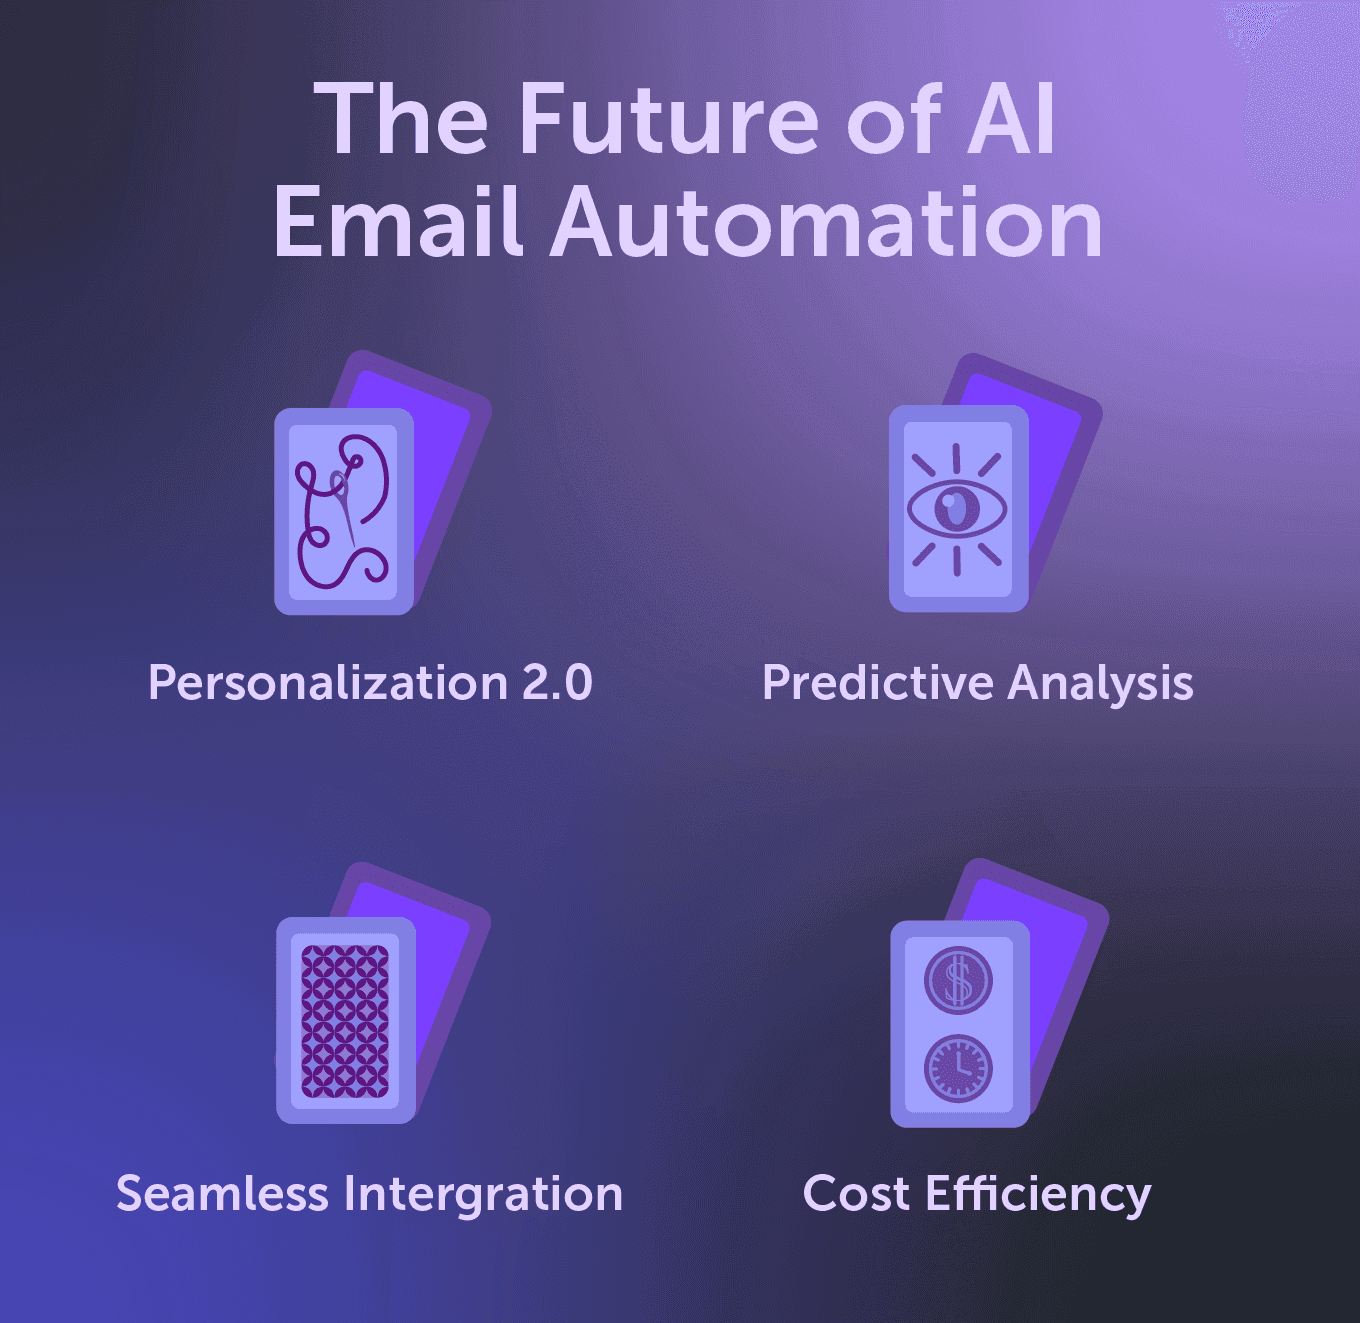 The Future of AI Email Automation graphic - Personalization 2.0, Predictive Analysis, Seamless Integration, Cost Efficiency